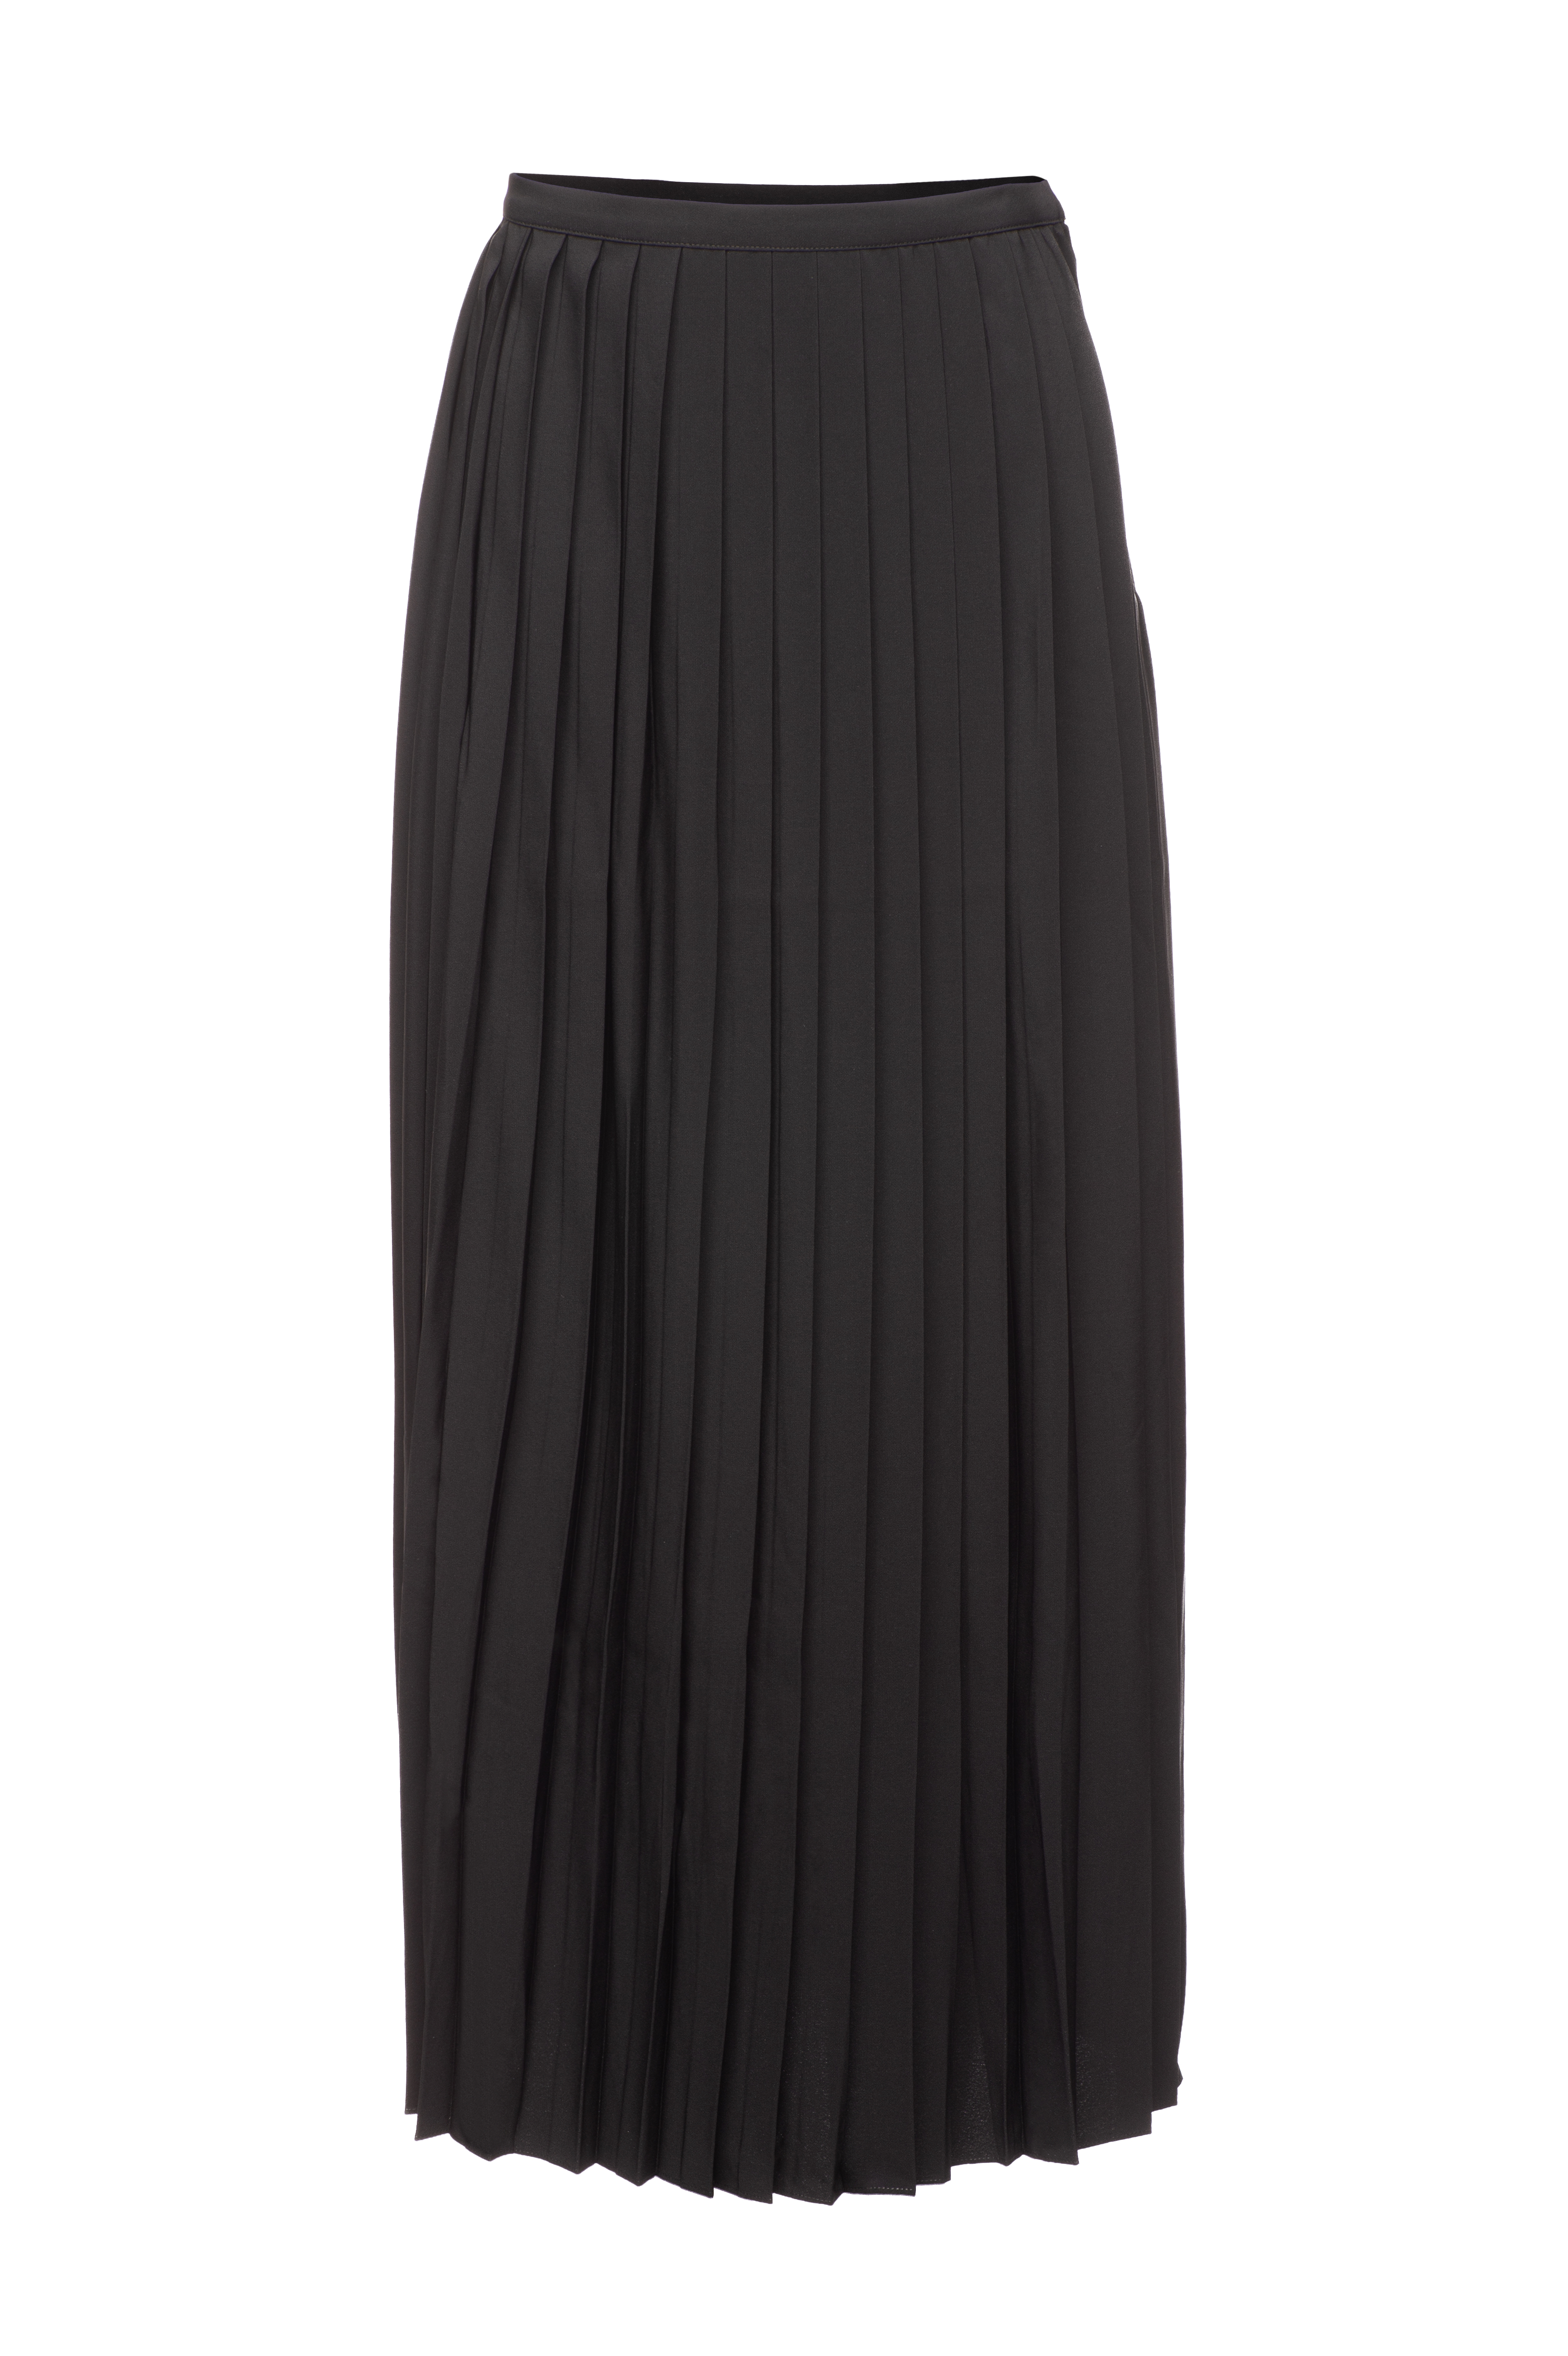 Mayada - Classic Pleated Skirt - Black Forest